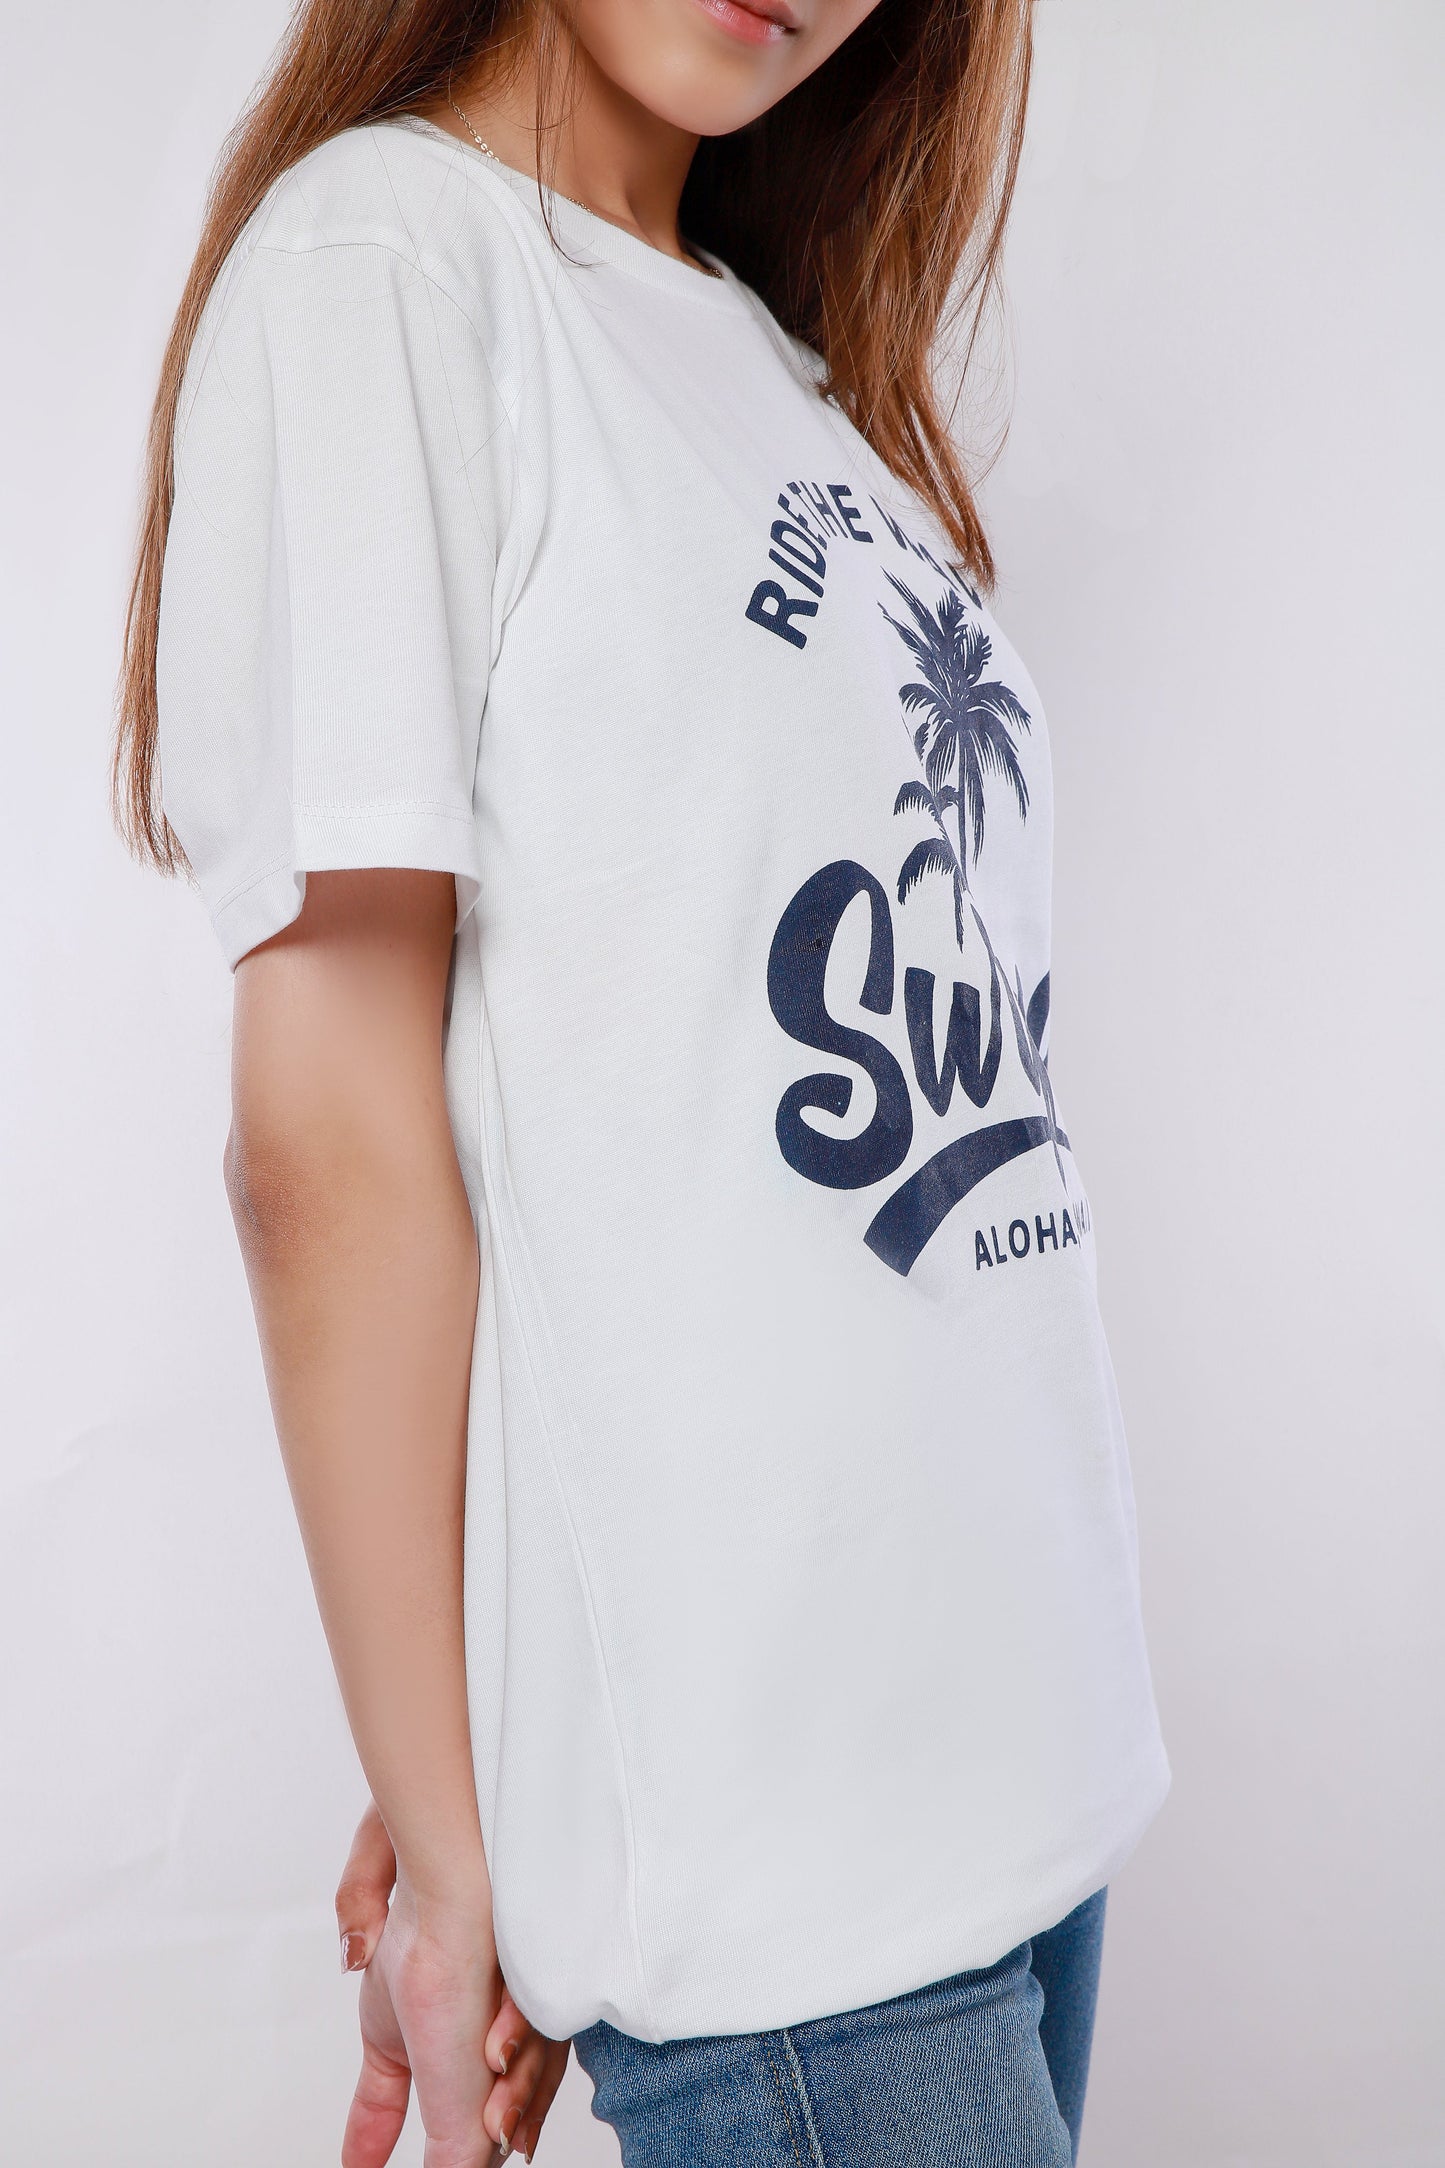 Surfing - Ride the waves Graphic Tee